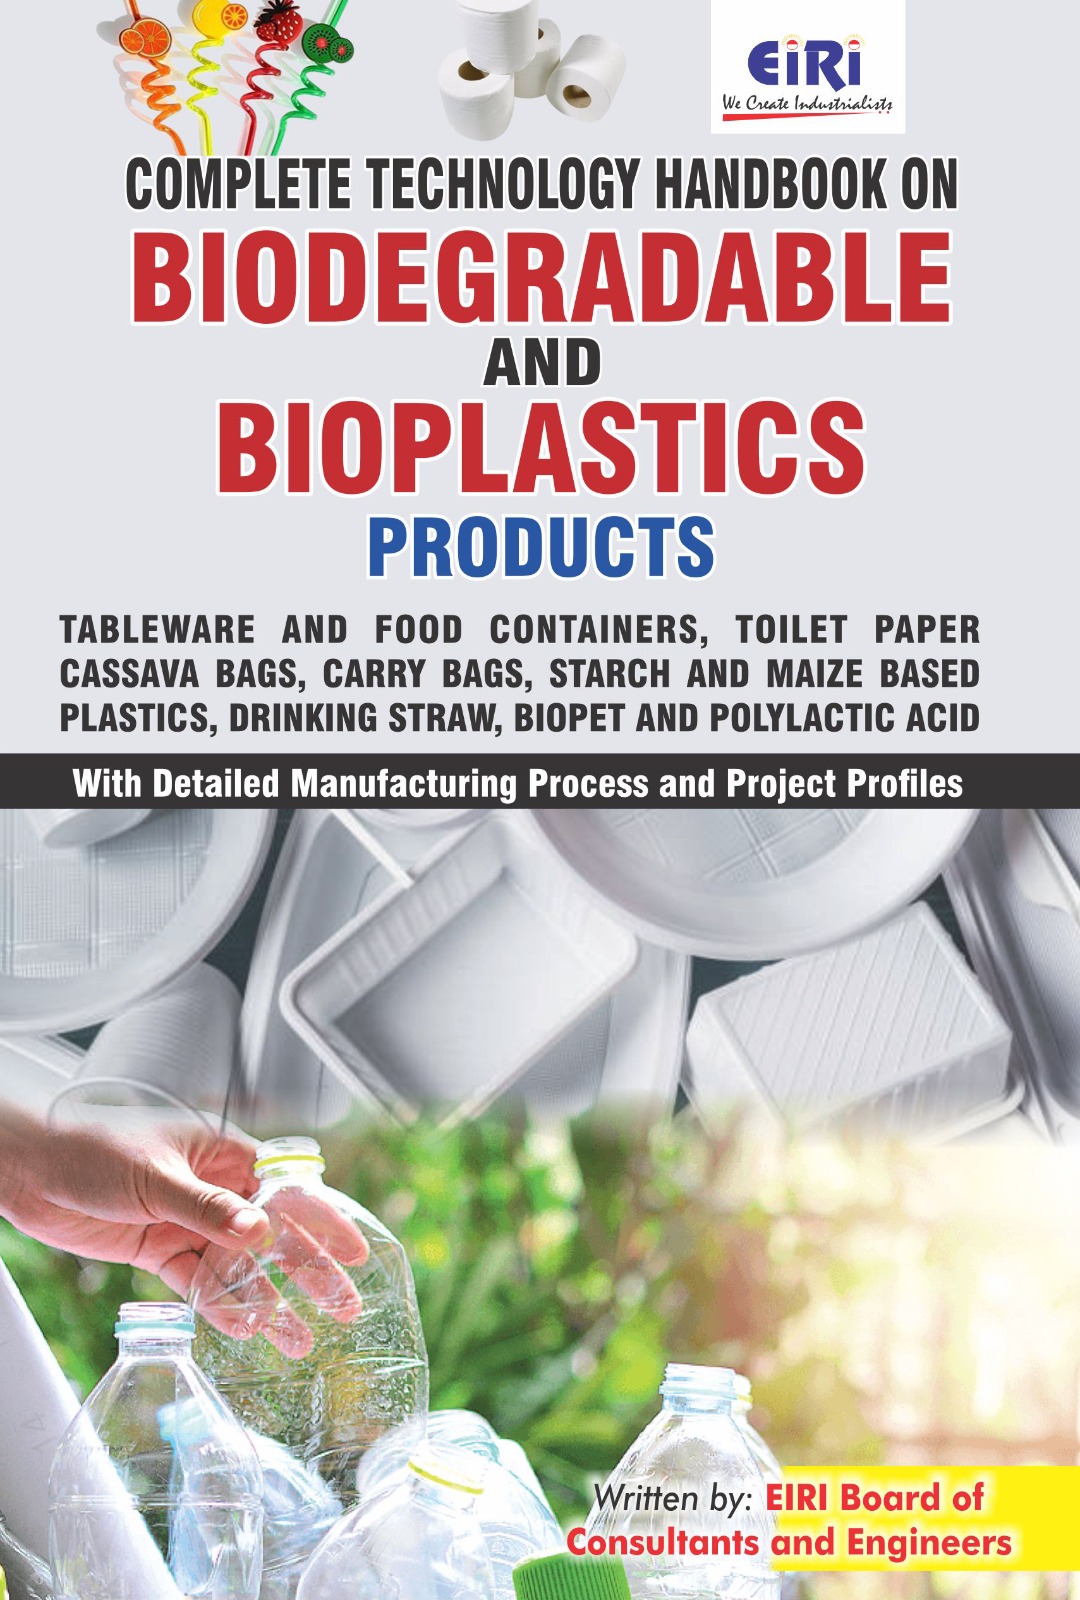 Complete Technology Handbook on Biodegradable and Bioplastics Products like Tableware and Food Containers, Toilet Paper, Cassava Bags, Carry Bags, Biopet and Polylactic Acid with Detailed Manufacturing Process and Project Profiles